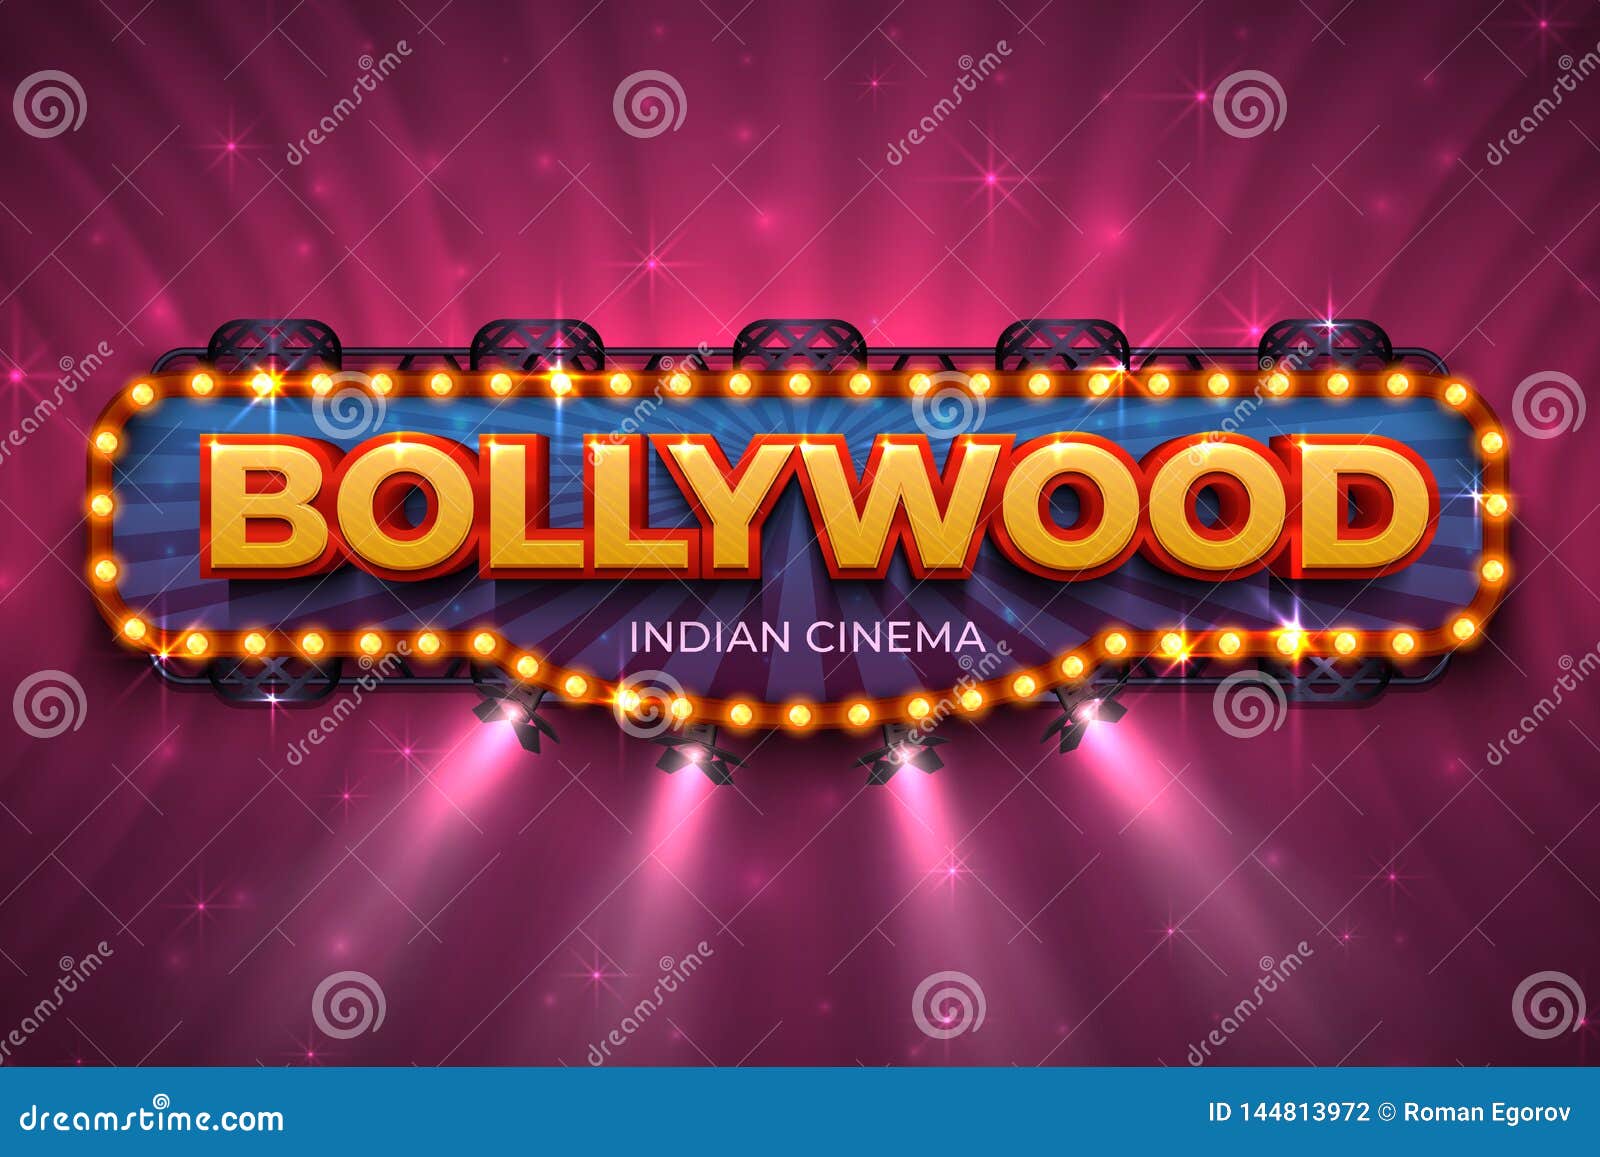 bollywood background. indian cinema poster with text and spot light, indian cinematography stage.  3d bollywood